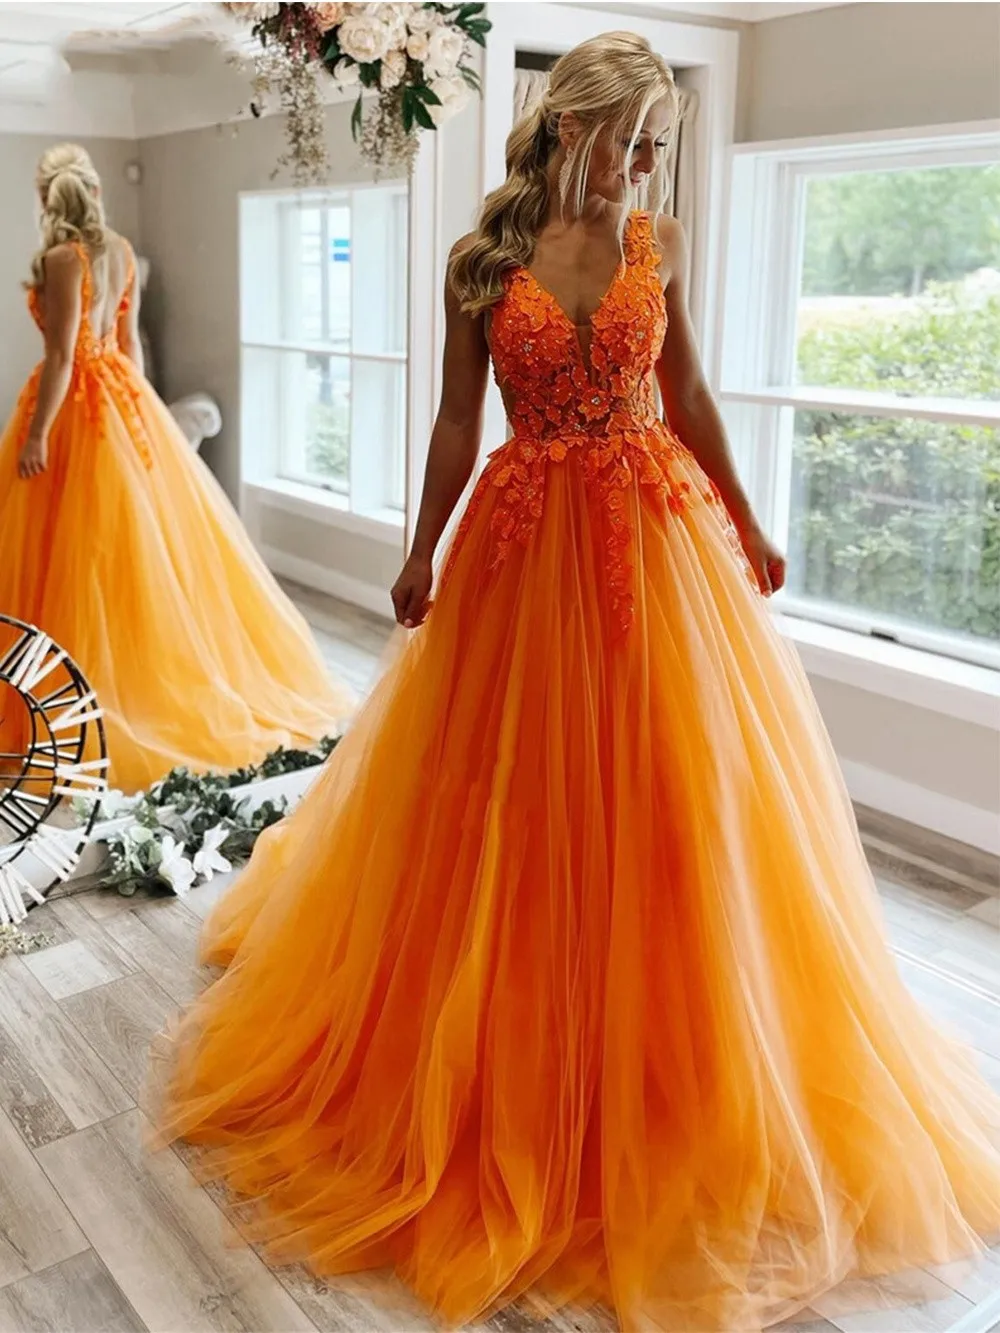 Orange Tulle Evening Party Dress Formal Graduation Dress A Line Celebrity Dress with Tiered Layers Elegant Party Gown for Women